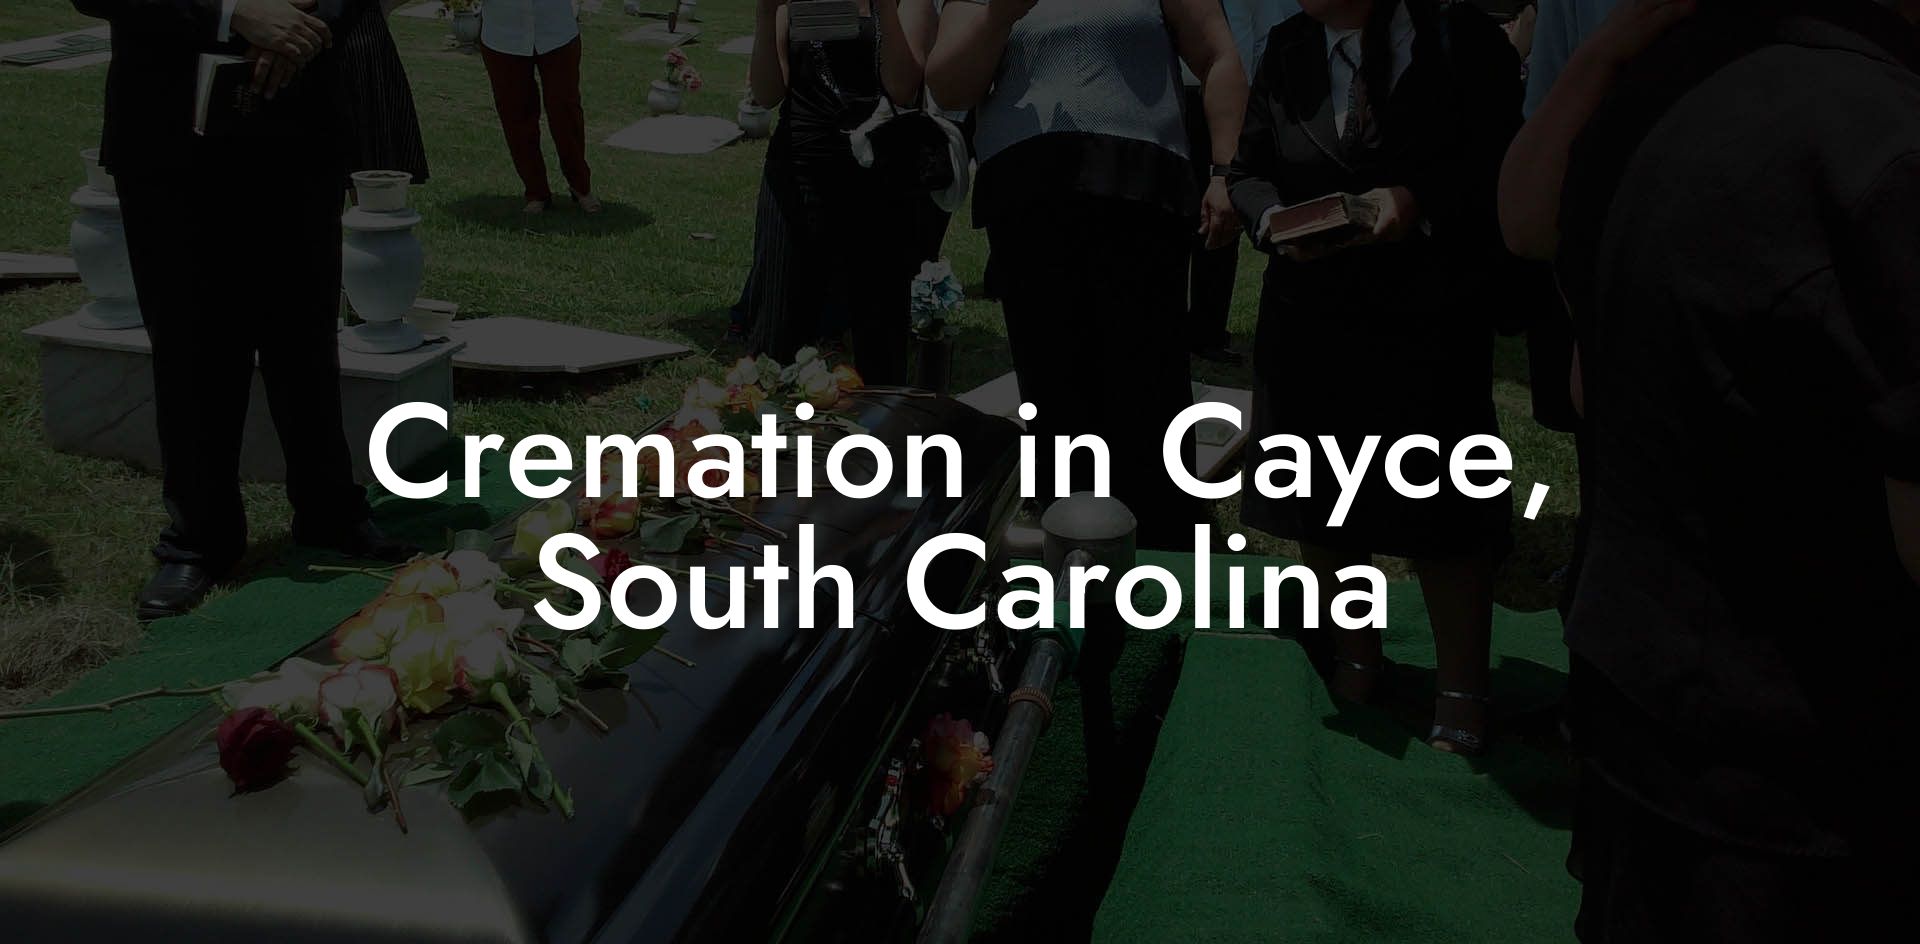 Cremation in Cayce, South Carolina